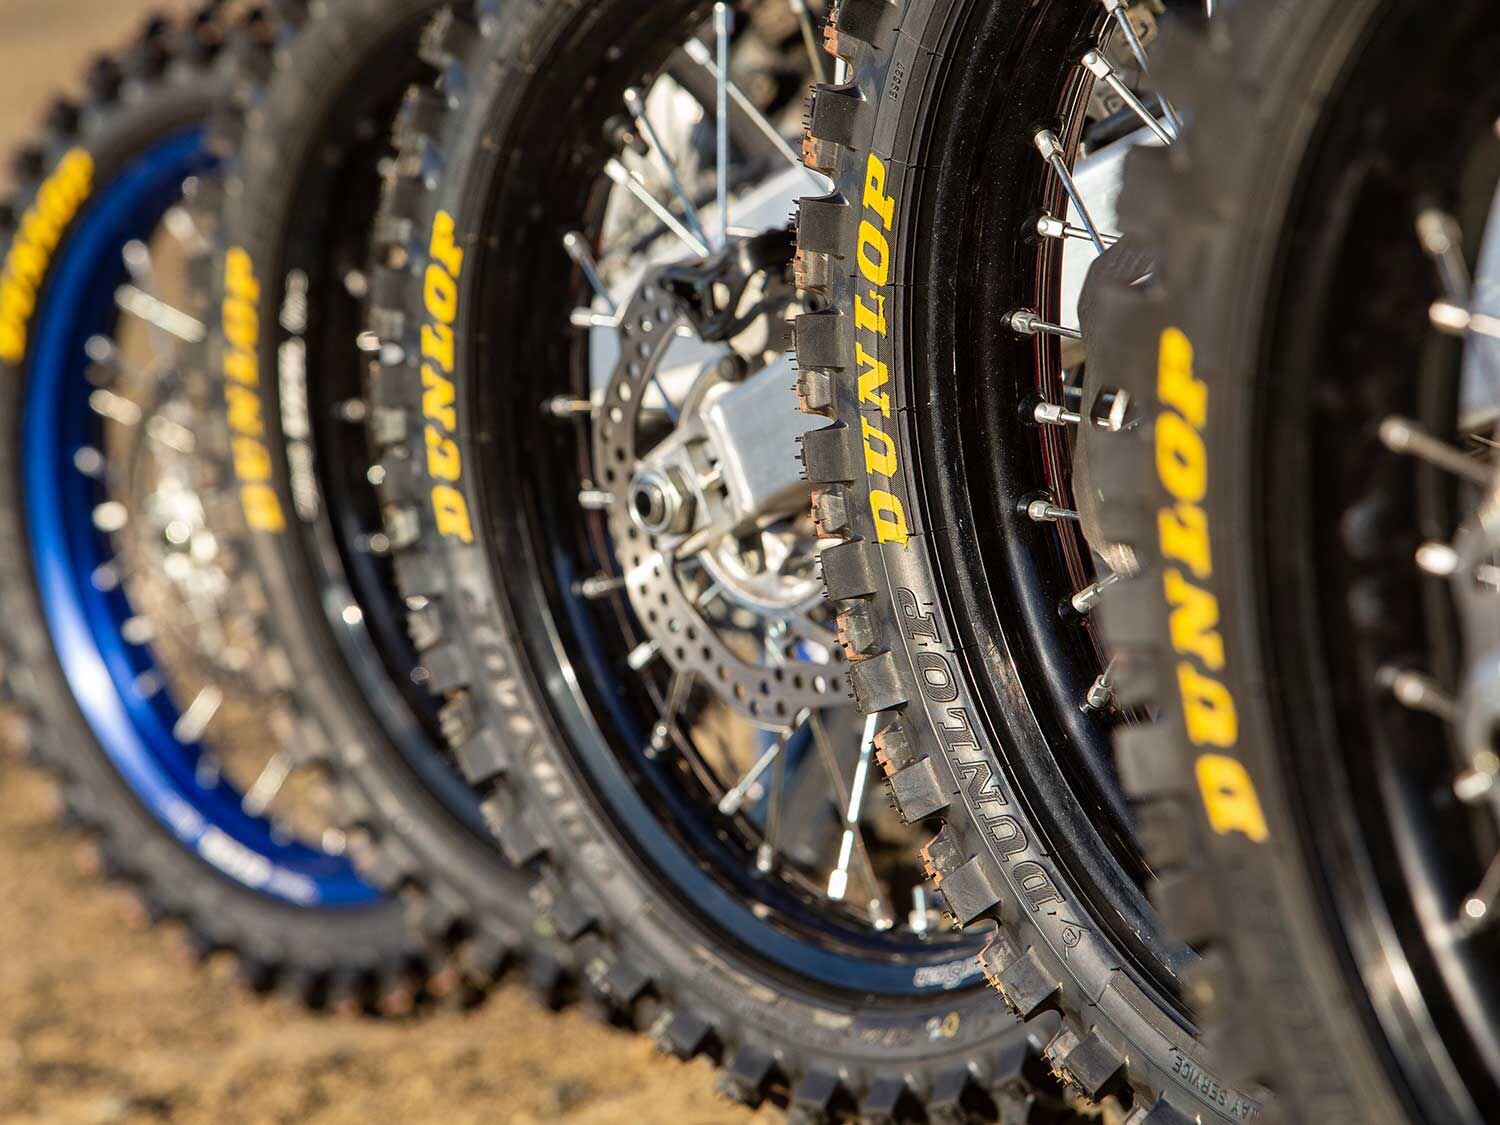 Traction parity among the five motorcycles was ensured with the use of Dunlop Geomax MX33 soft-to-intermediate-terrain tires.